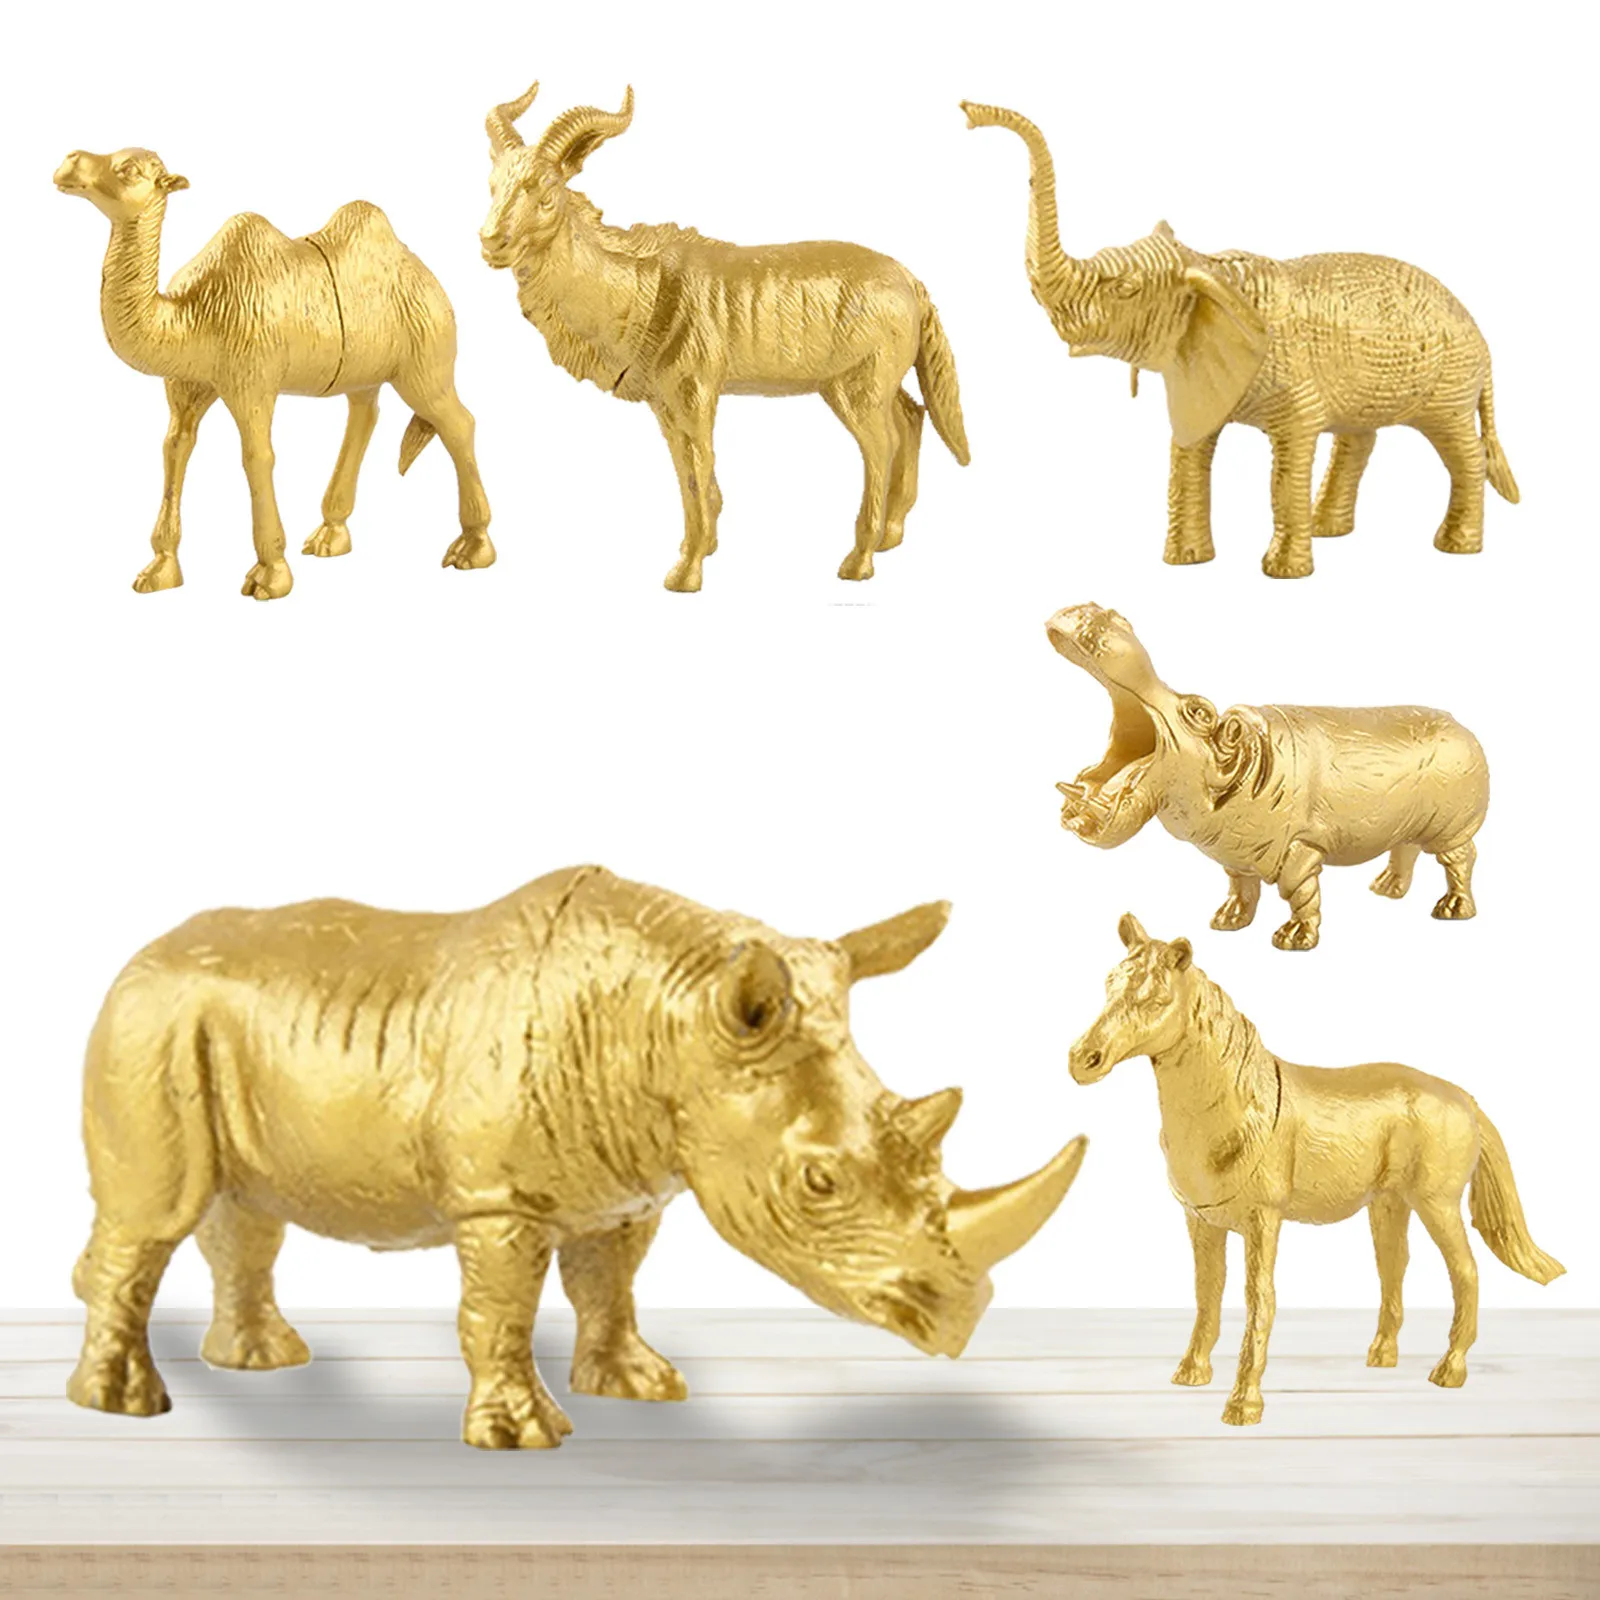 Gold Animals Figurines Model Toys Jungle Animal Figures Wild Plastic  Animals Model Home Decoration Gift Various Animal Models - Biology -  AliExpress